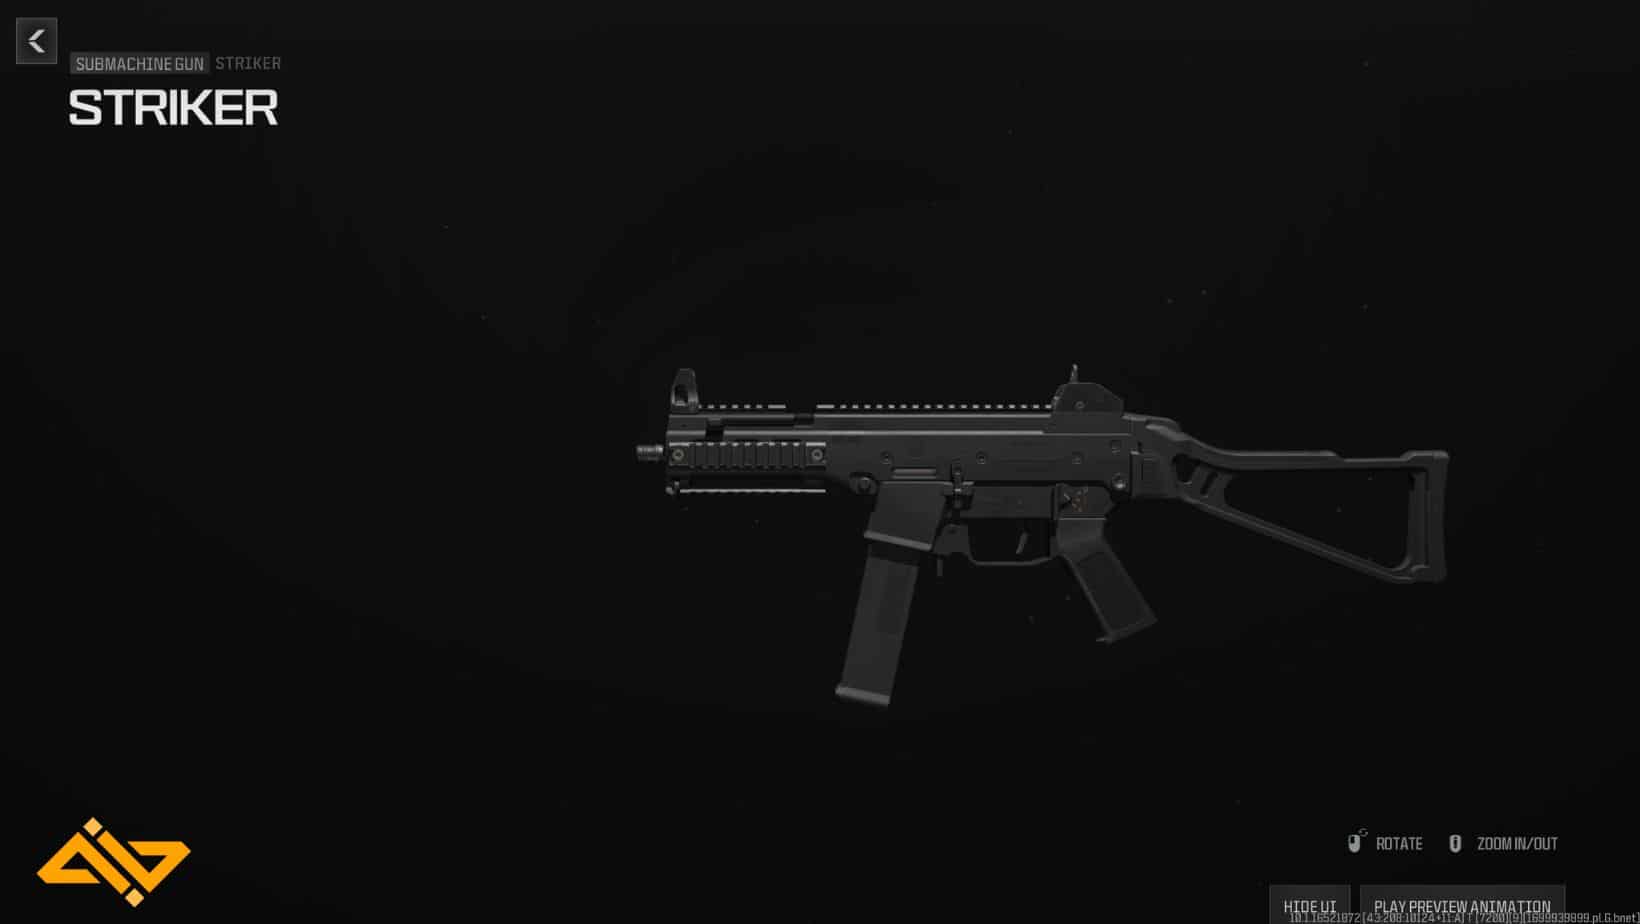 The Striker SMG is a good option due to its high fire rate and damage in close combat.